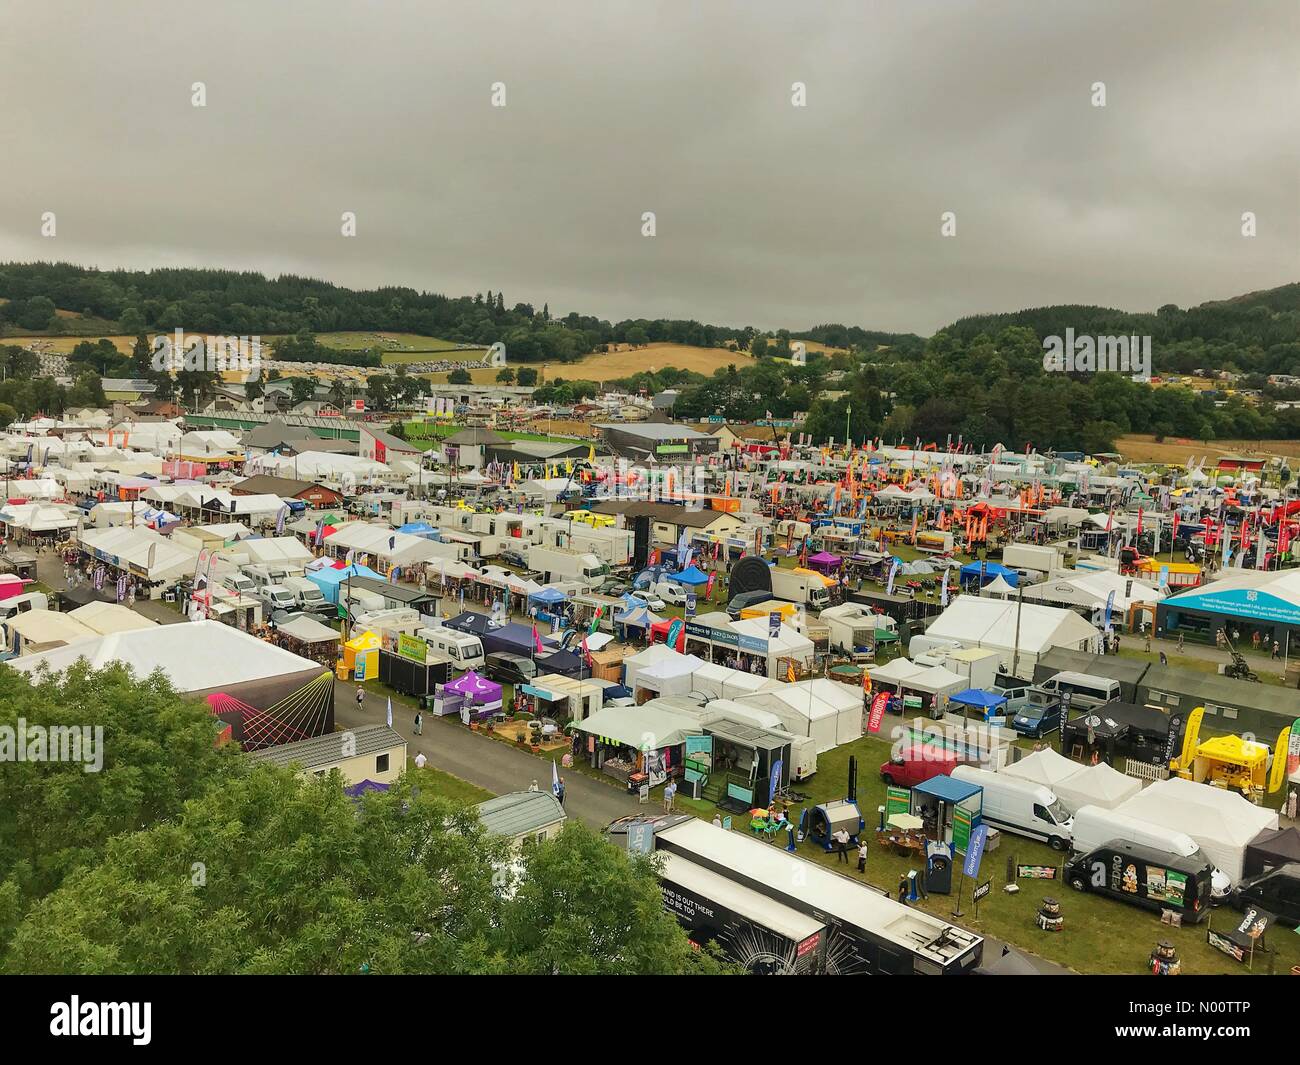 Builth Wells, Powys, Wales. 23rd July 2018. Aerial view of the show ground on first day of the Royal Welsh Show in Builth Wells, Powys, Wales. Picture taken 9.15am, Monday 23 July 2018. Record attendance expected over the four days of the show. Credit: Ceri Breeze/StockimoNews/Alamy Live News Stock Photo